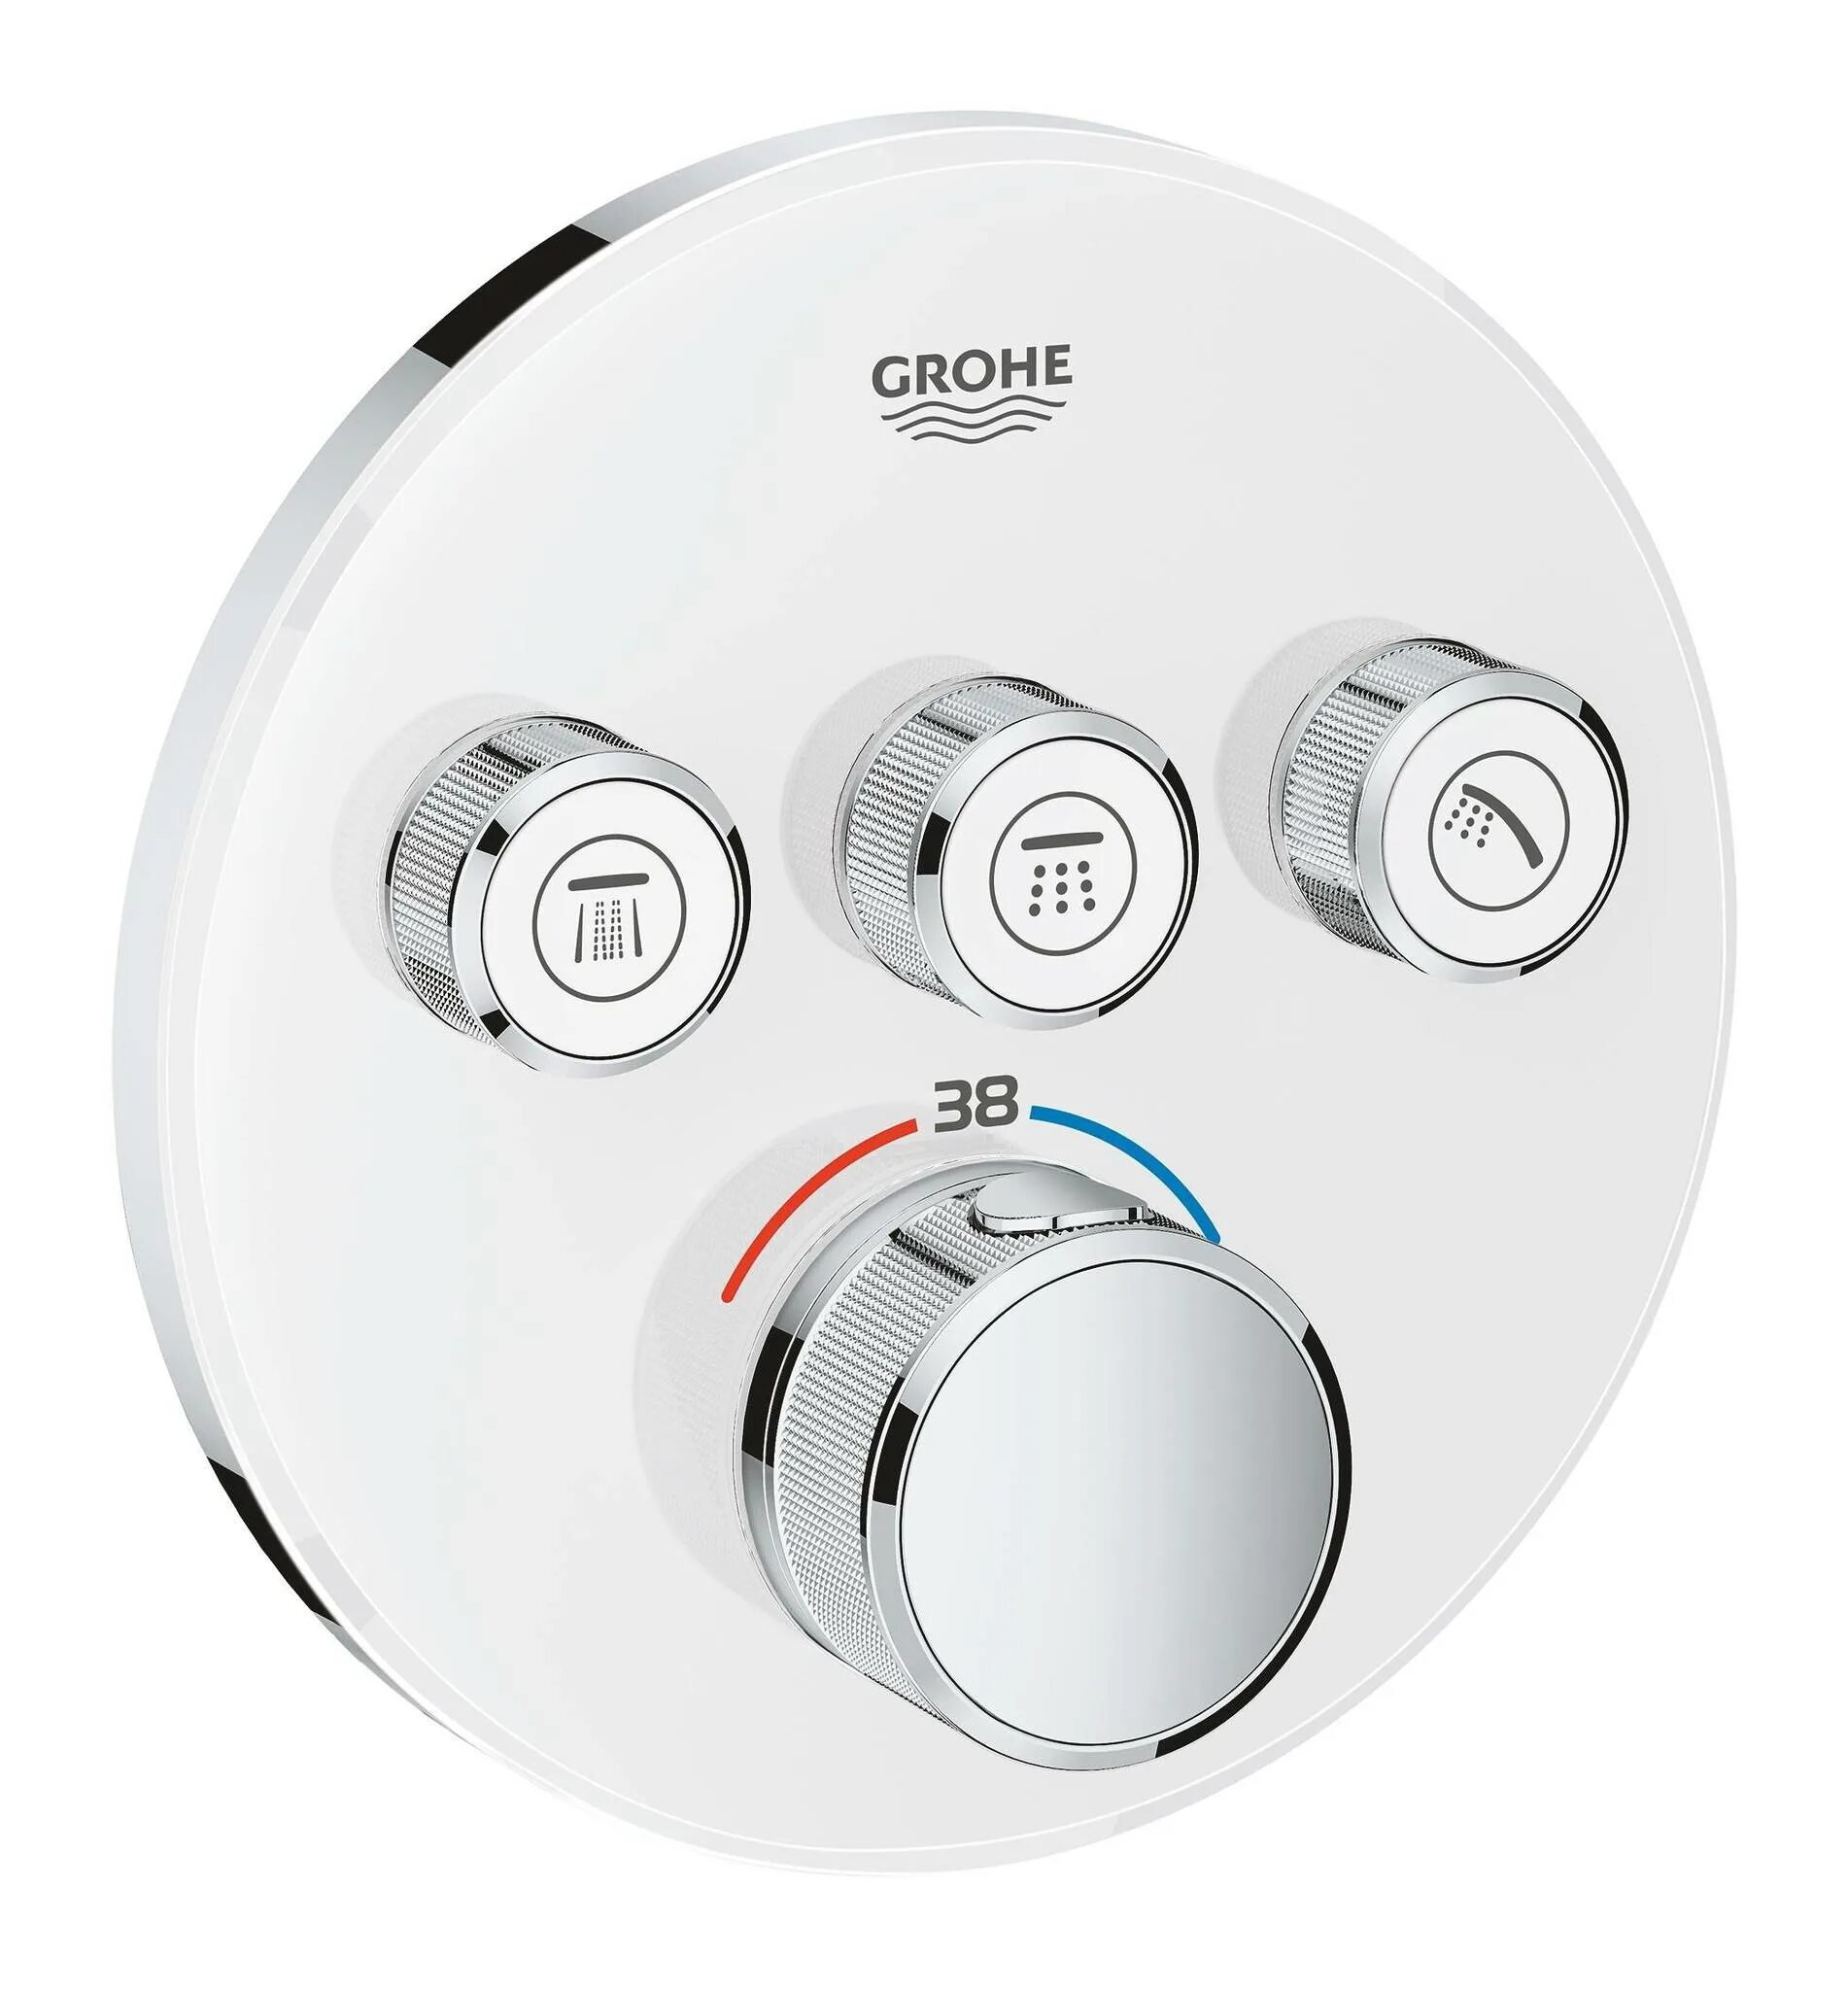 Grohe Grohtherm SMARTCONTROL 29149000. Термостат Grohe 29125000. Grohe SMARTCONTROL термостат. Термостат Grohe Grohtherm SMARTCONTROL. Встроенный душа grohe